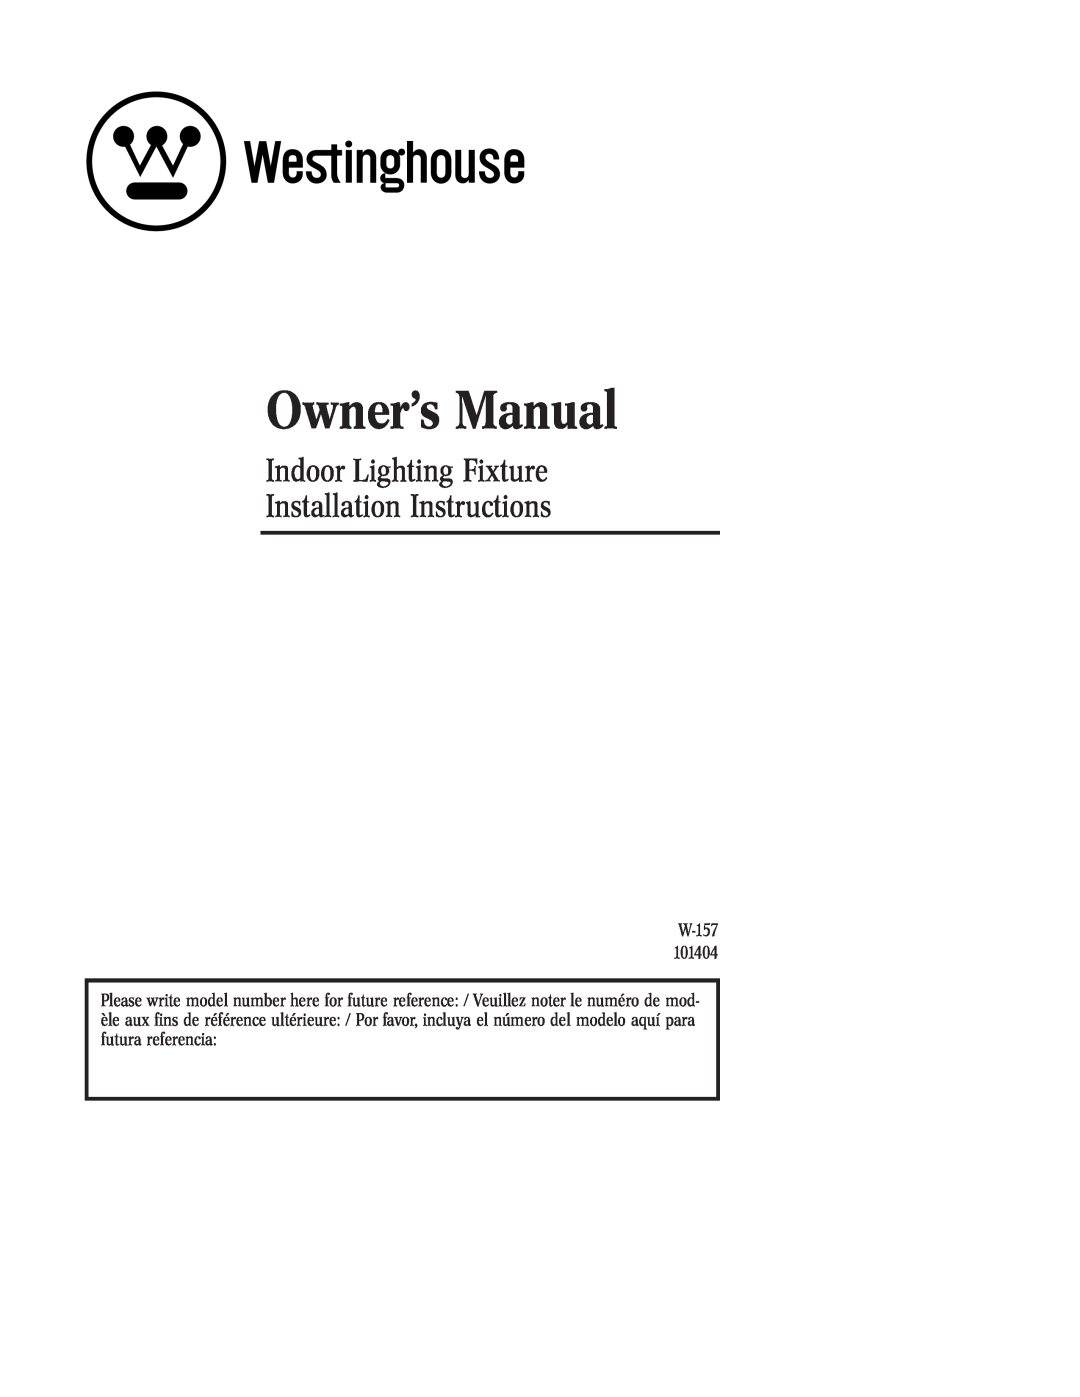 Westinghouse W-157 101404 owner manual Indoor Lighting Fixture Installation Instructions 